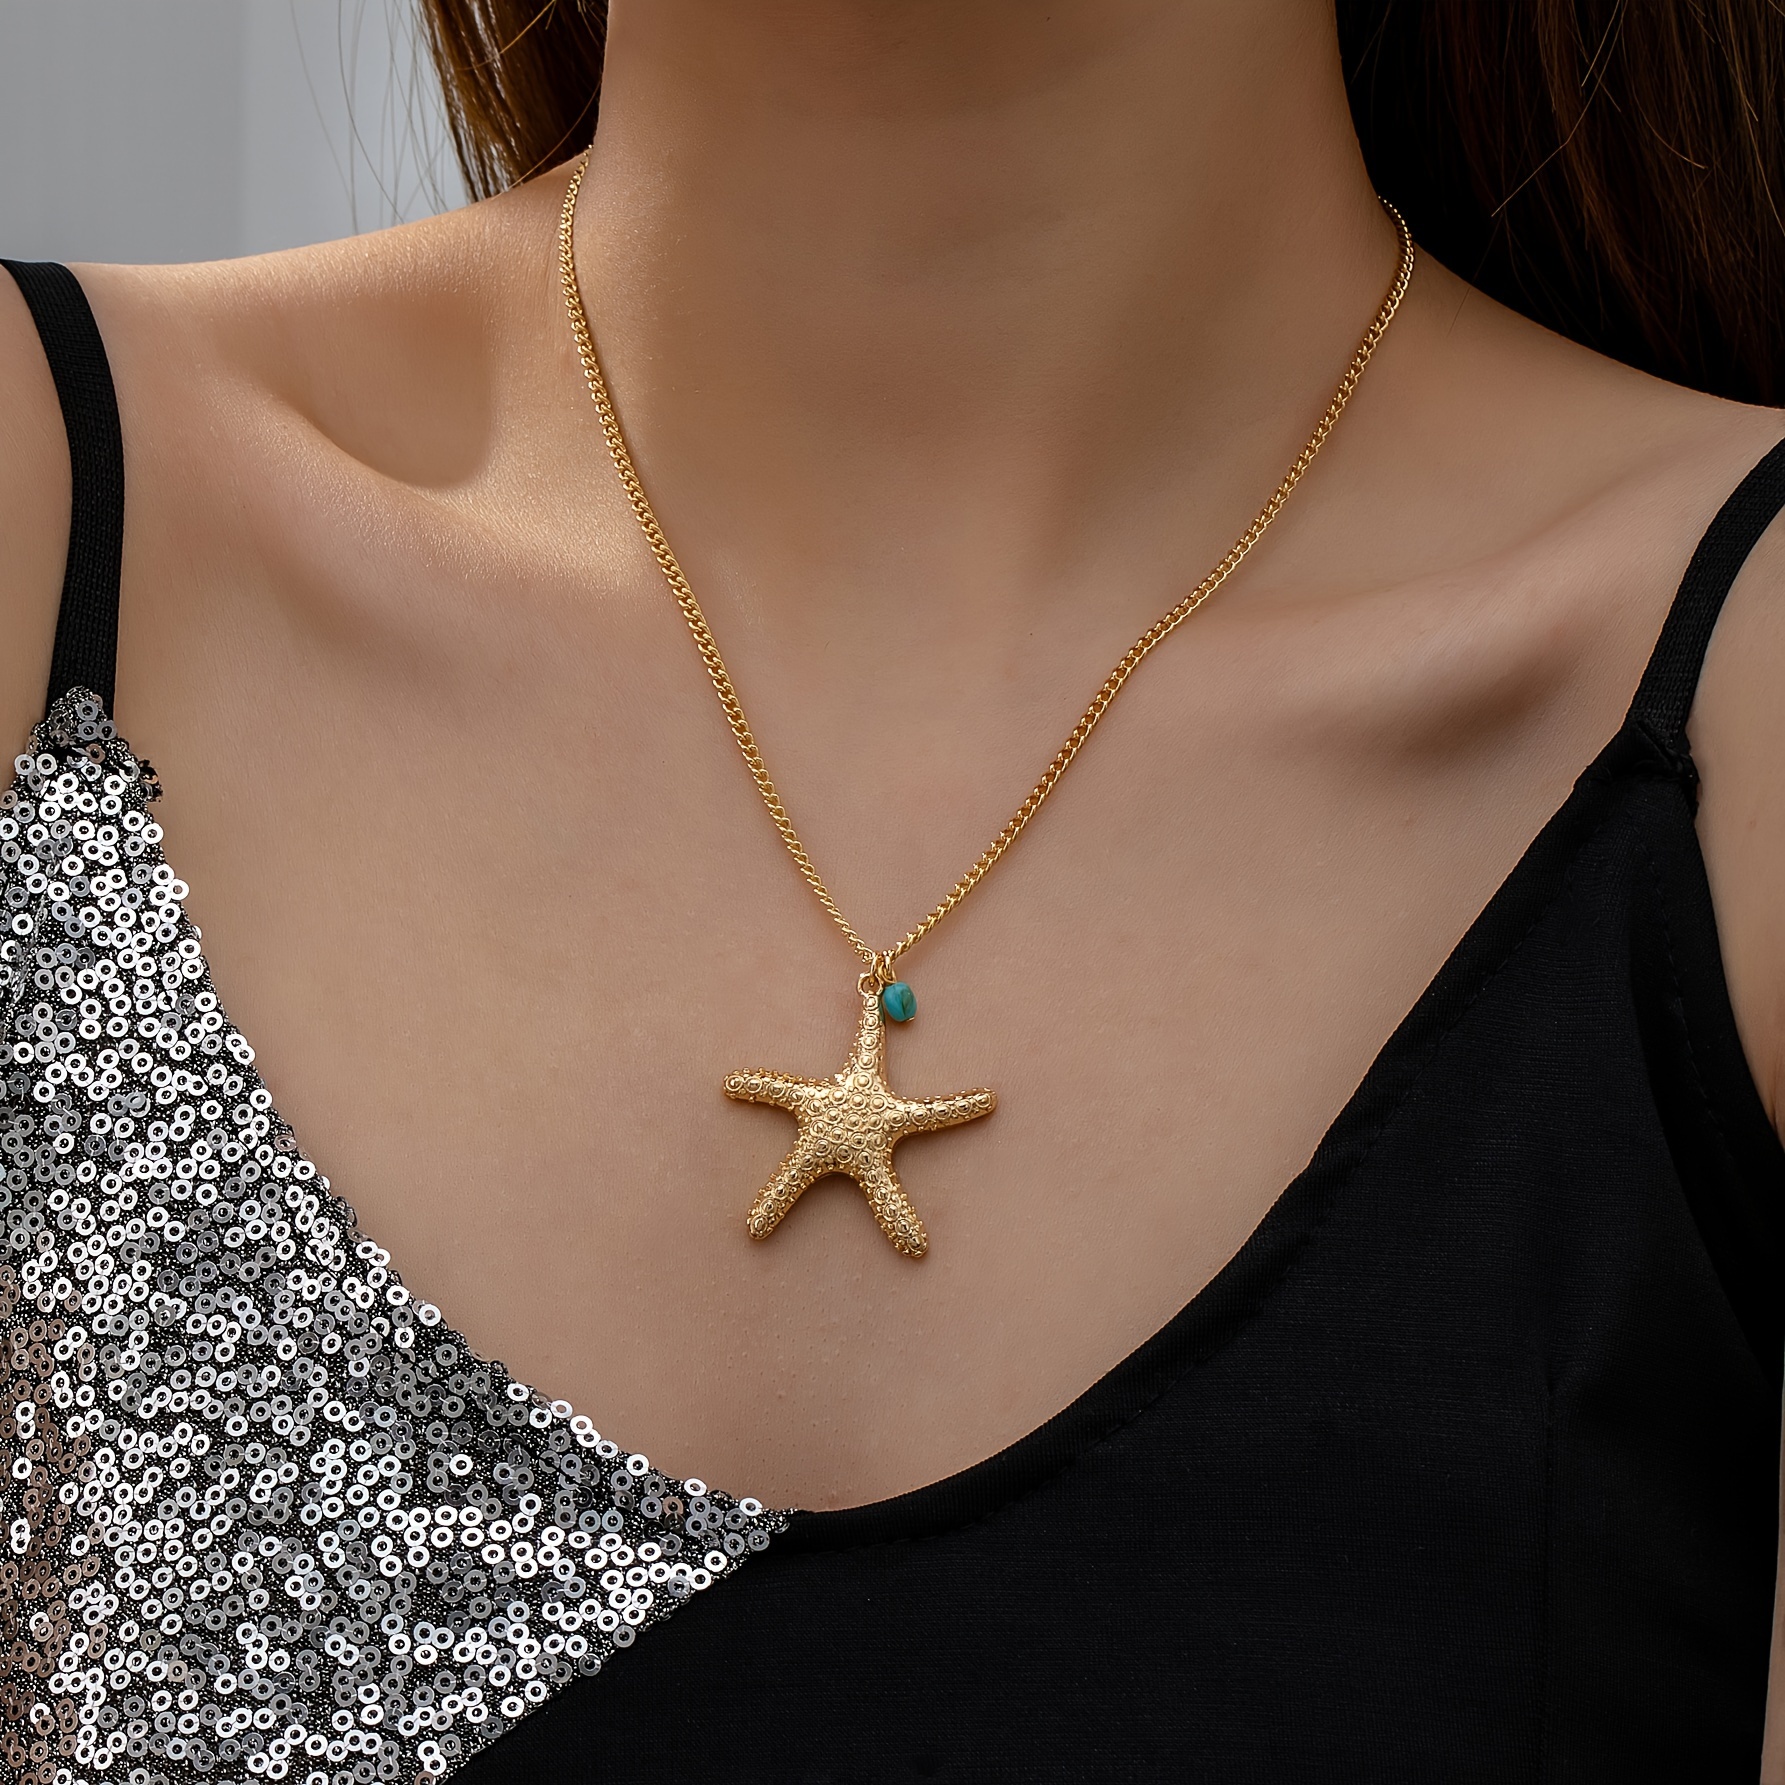 

Starfish Pendant Necklace 18k Gold Plated Ocean Style Marine Life Pendant Design Beach Party Jewelry